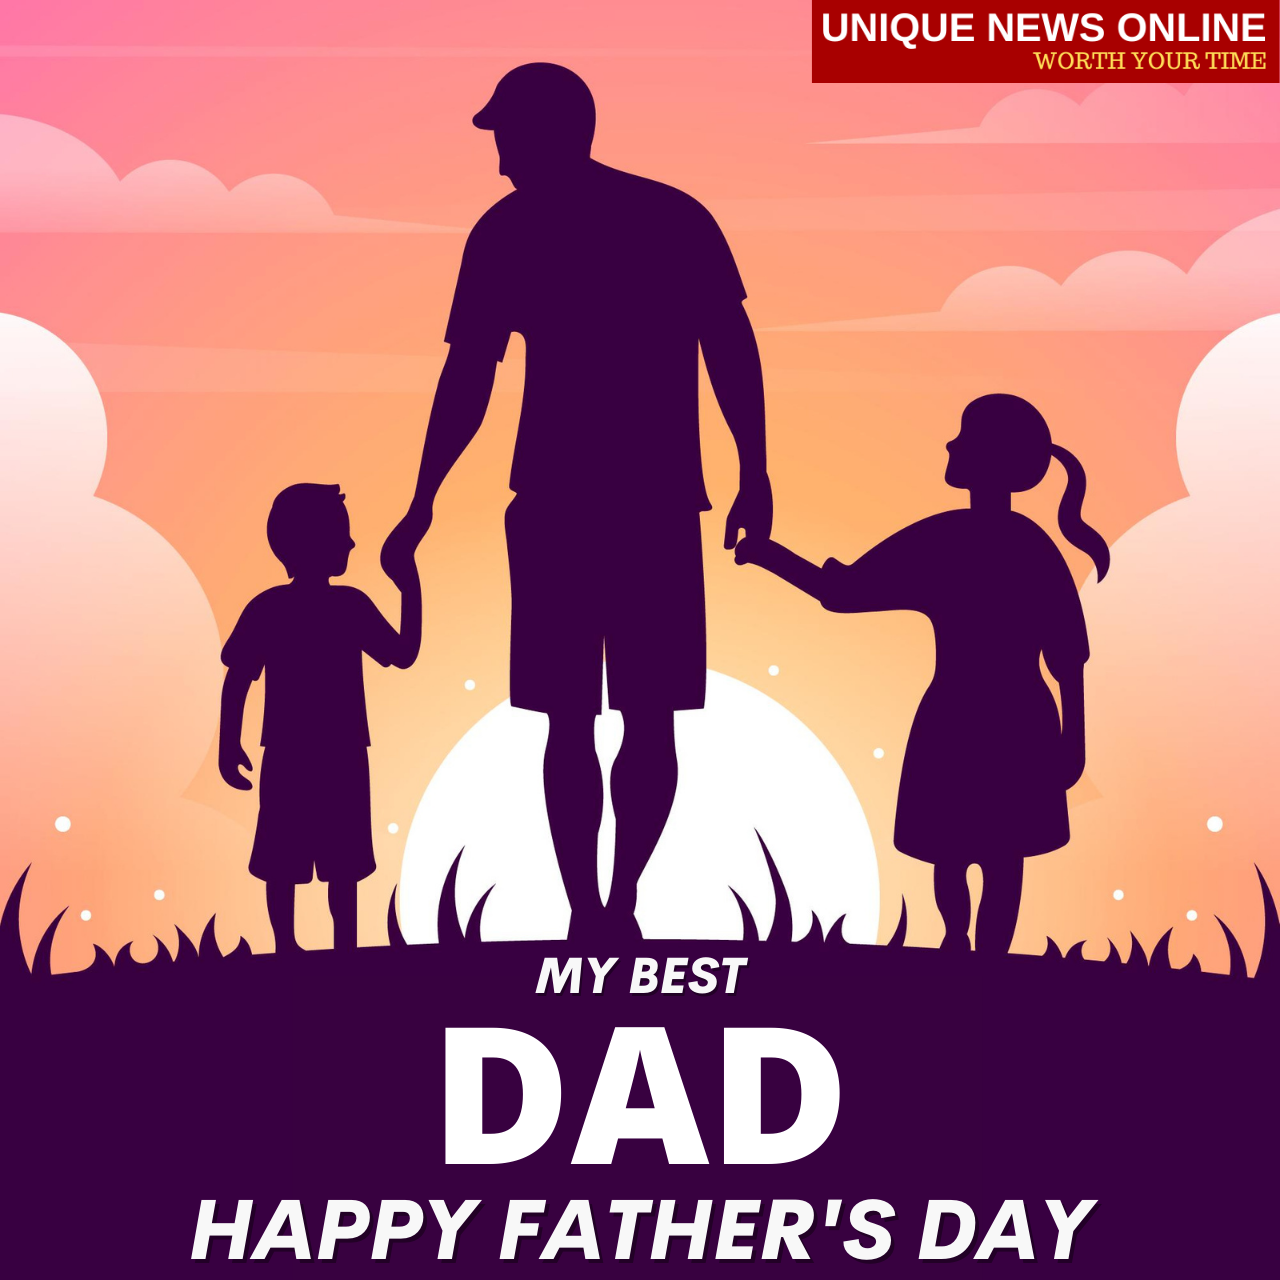 Happy Father's Day 2021 Wishes, Images, Quotes, Facebook Greetings, Twitter Messages, and WhatsApp Status to greet your lovely Dad